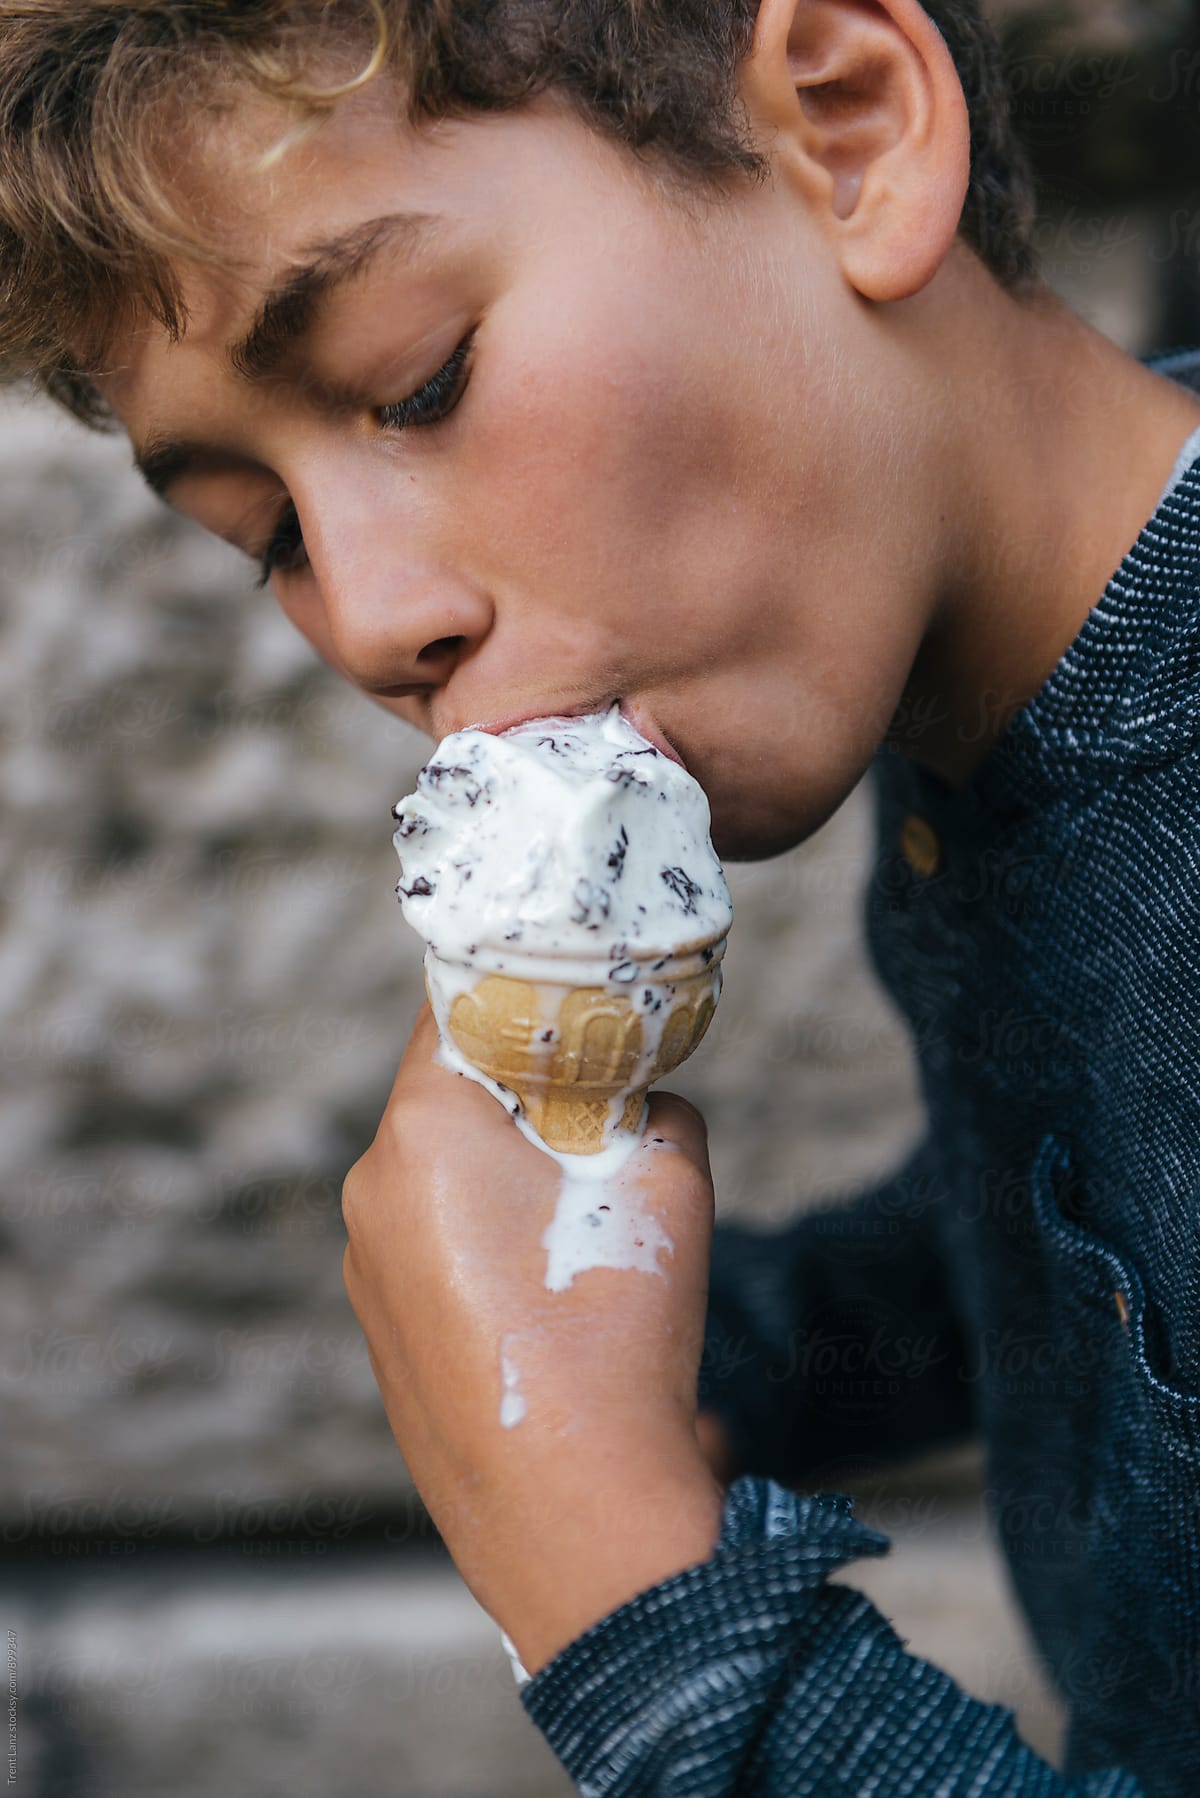 Boy eating melted ice cream while looking down